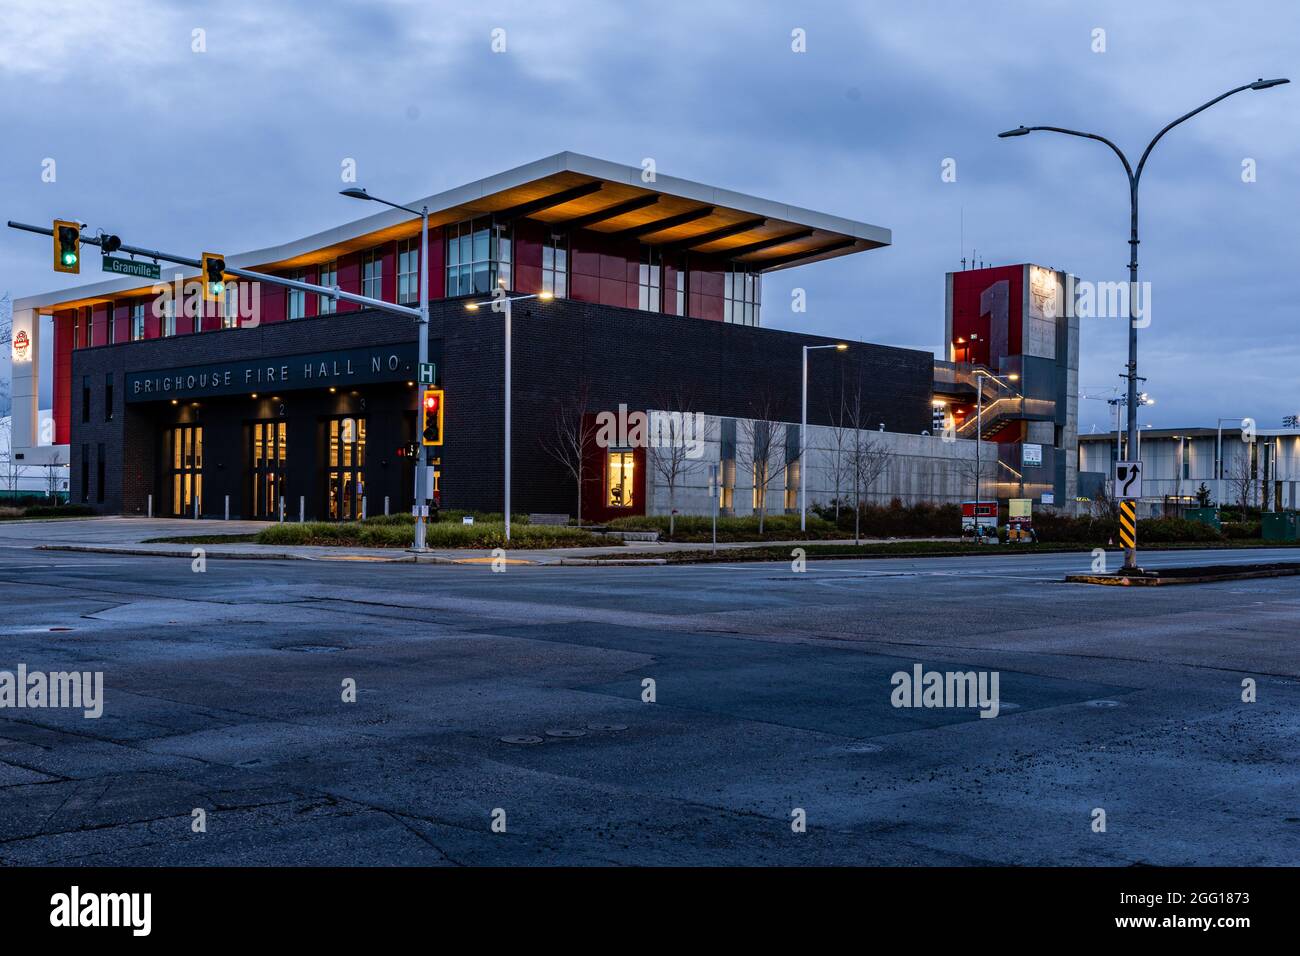 RICHMOND, CANADA - DECEMBER 06, 2020: Brighouse Fire Hall building during twilight. Stock Photo